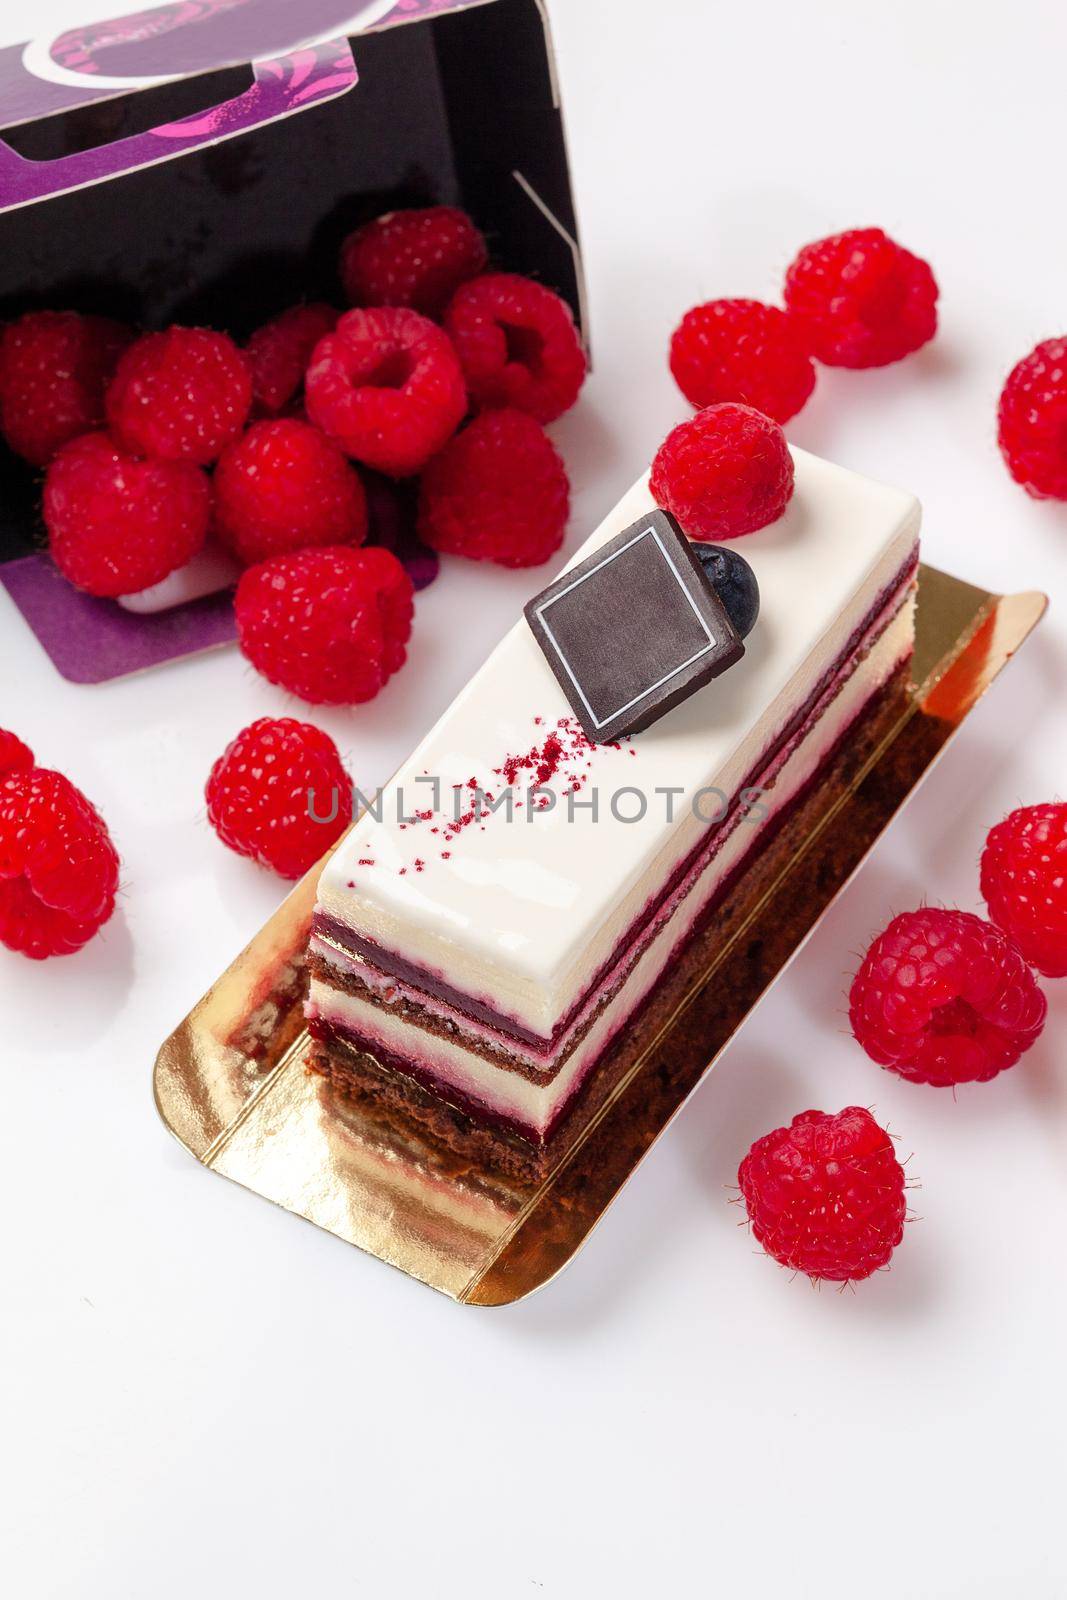 Chocolate sponge cake slice with whipped cheese cream, raspberry confit and fresh berries by nazarovsergey